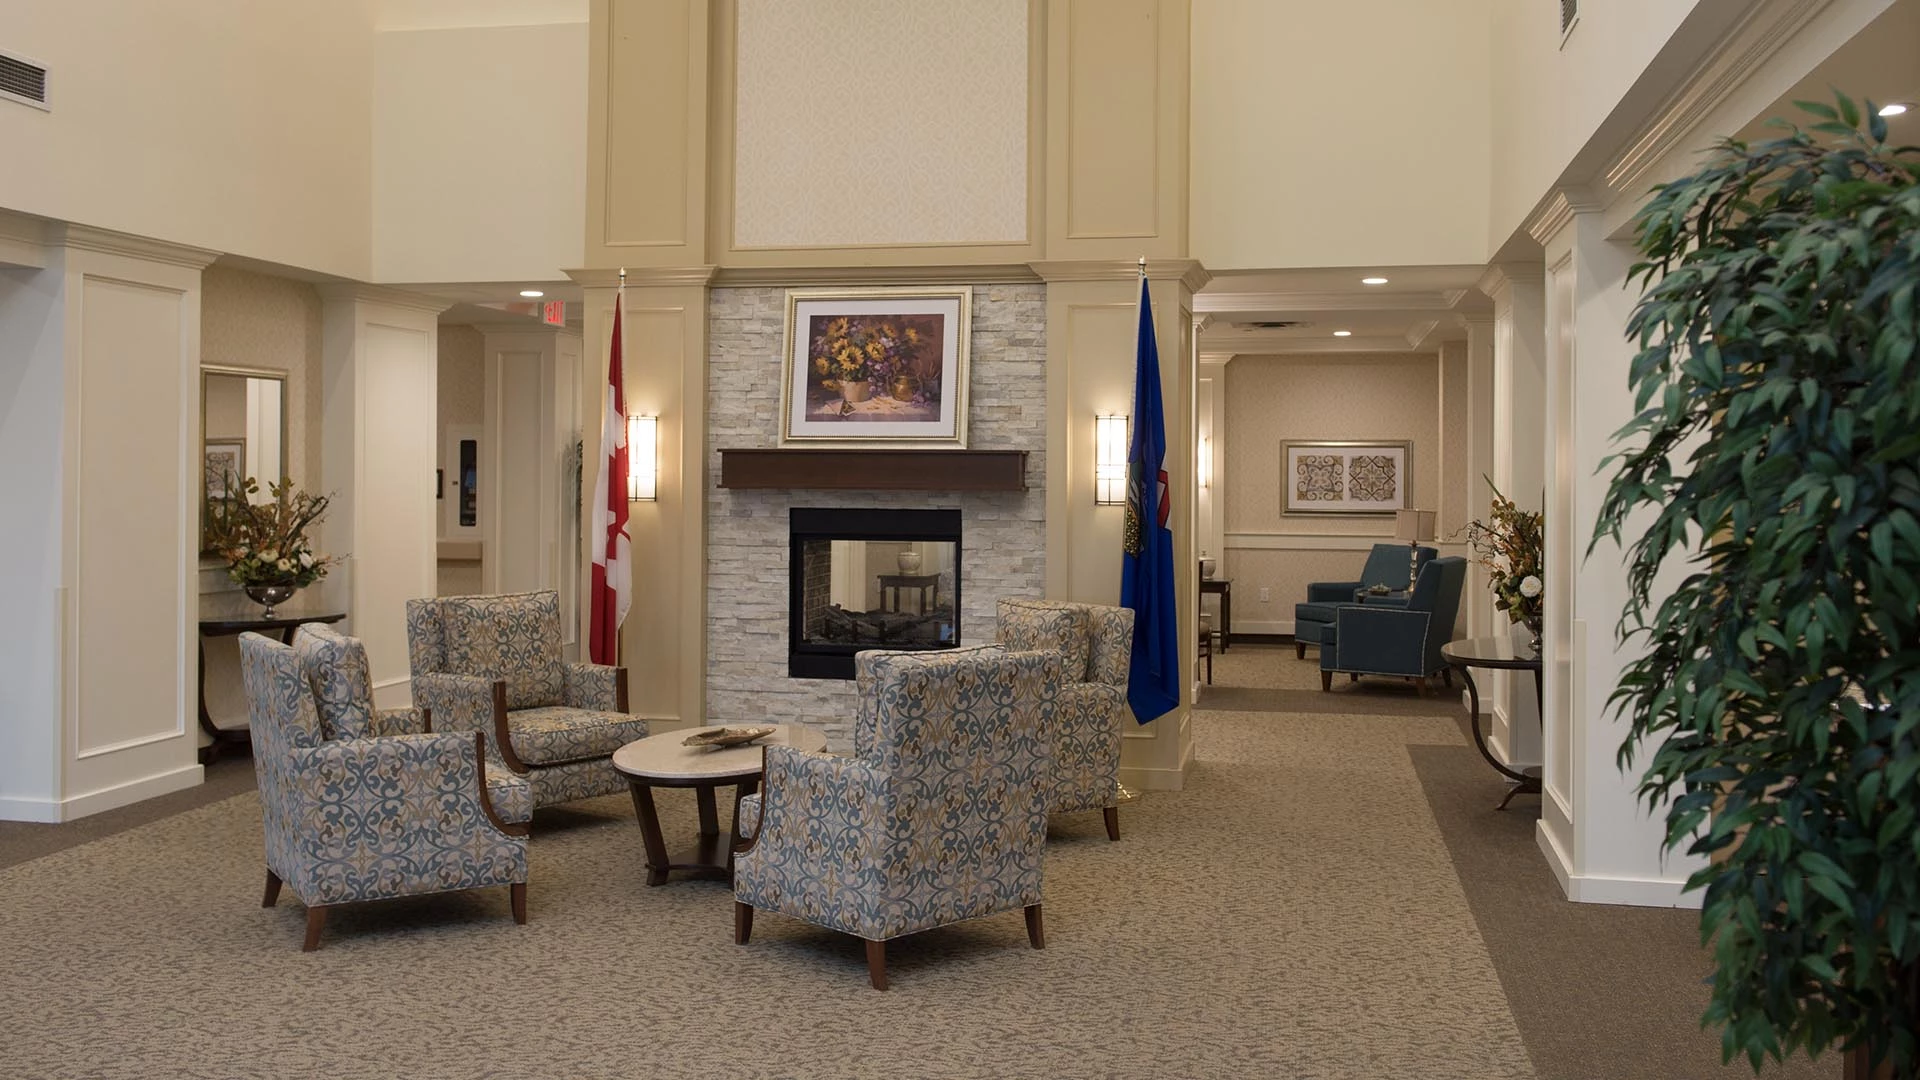 Arm chairs and a fireplace in the lobby of Everitt Gardens in St. Albert